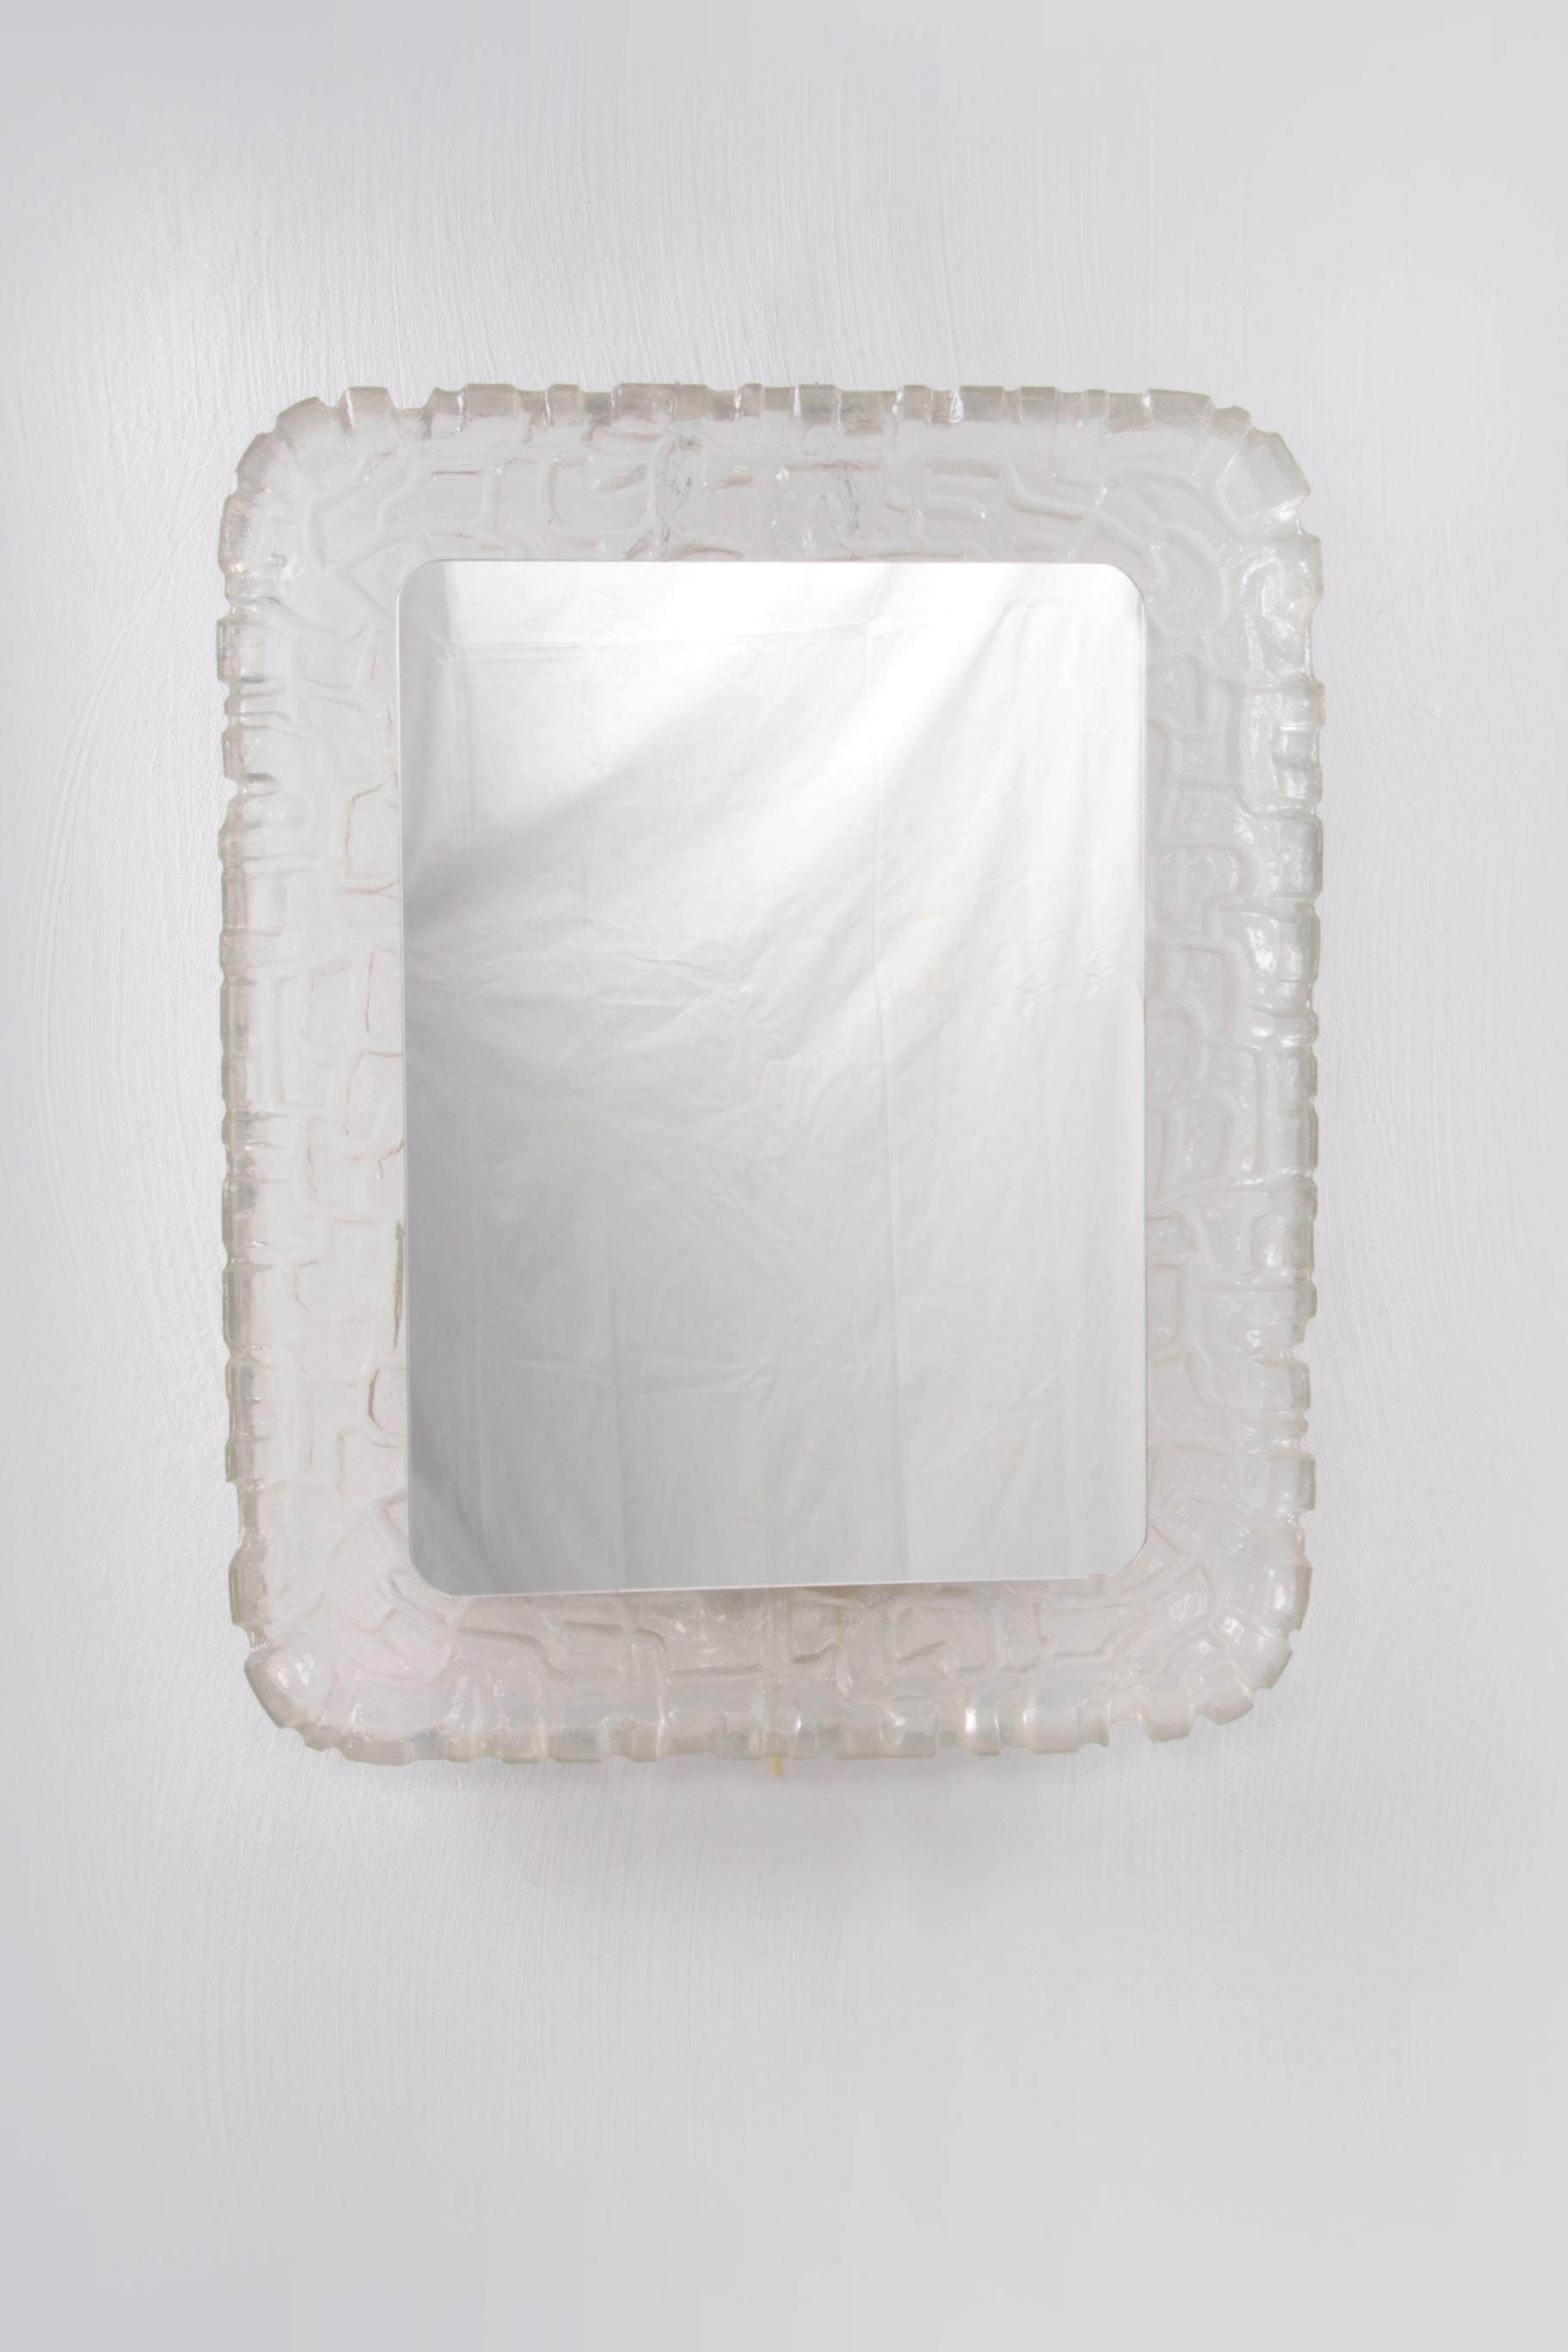 longated Plexiglas Hillebrand mirror, 1960 Germany


The beautiful mirror by Hillebrand is made of metal with plexiglass and was produced in the 1960s.

The mirror has interior lighting which emits a warm soft light when it is on. The mirror is